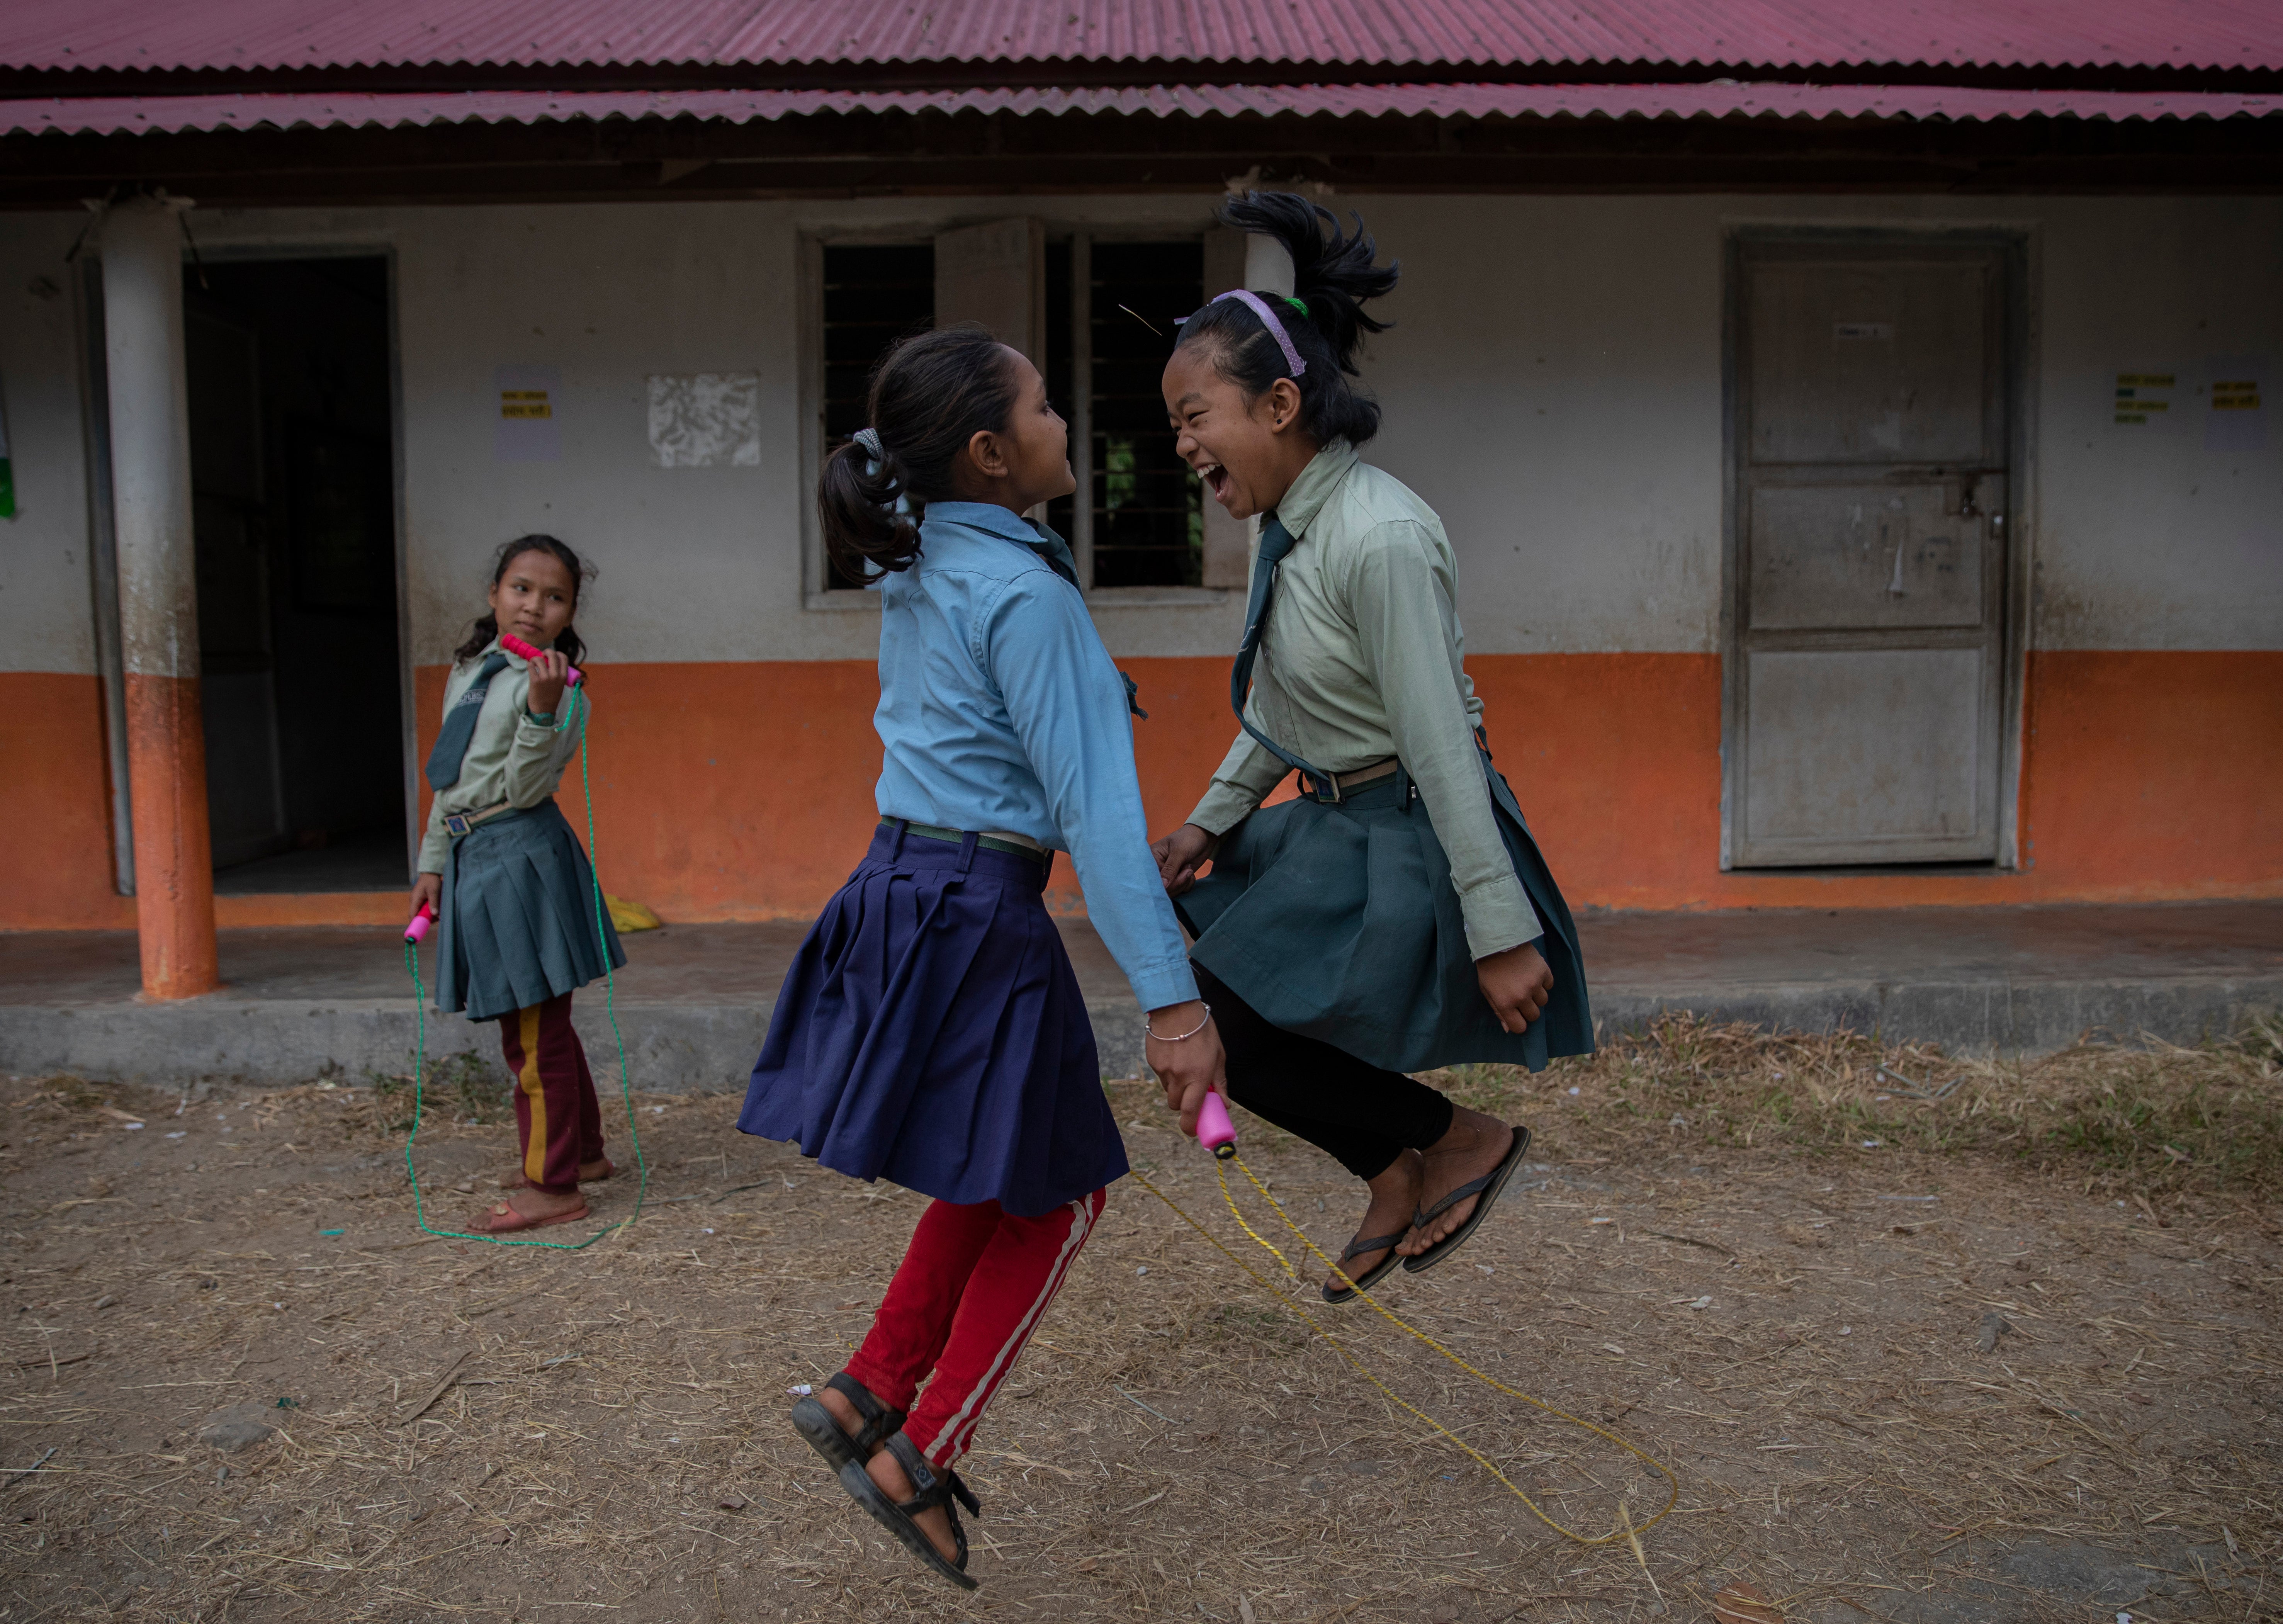 Pupils skipping during a break at the United World Schools Heluwabesi school in Nepal